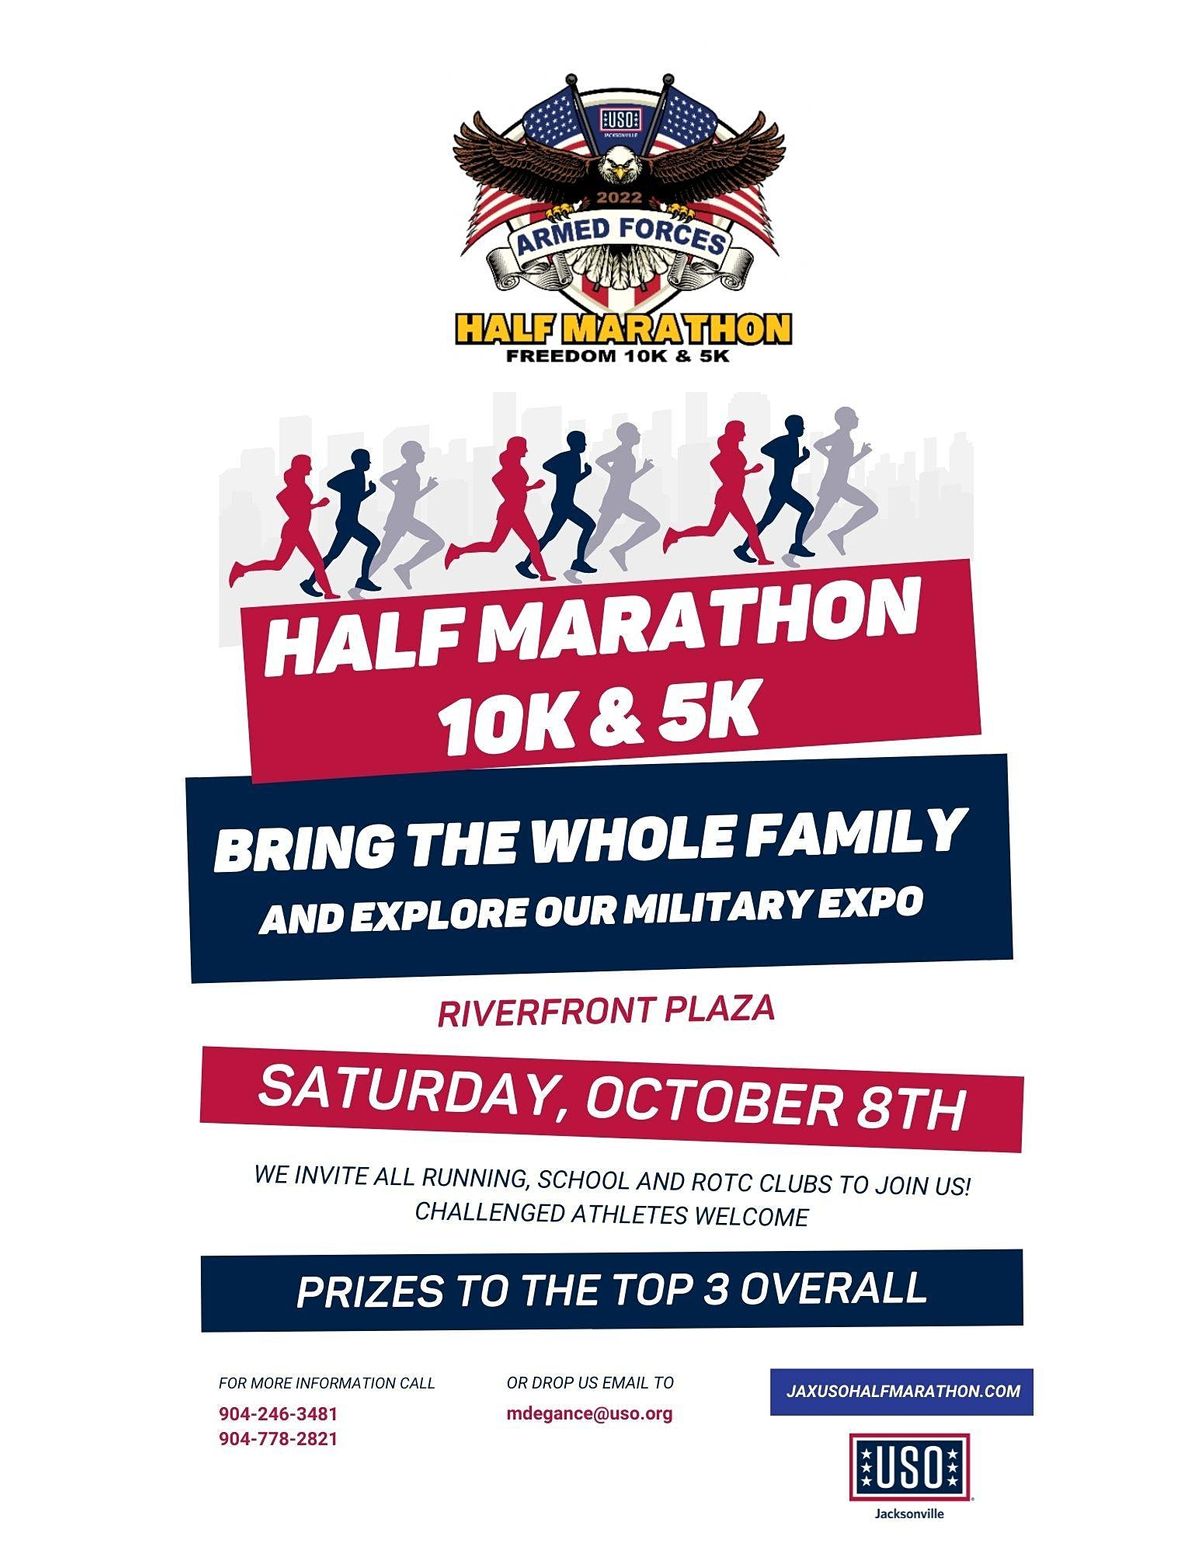 19th Annual Armed Forces Half Marathon and Freedom 10K & 5K